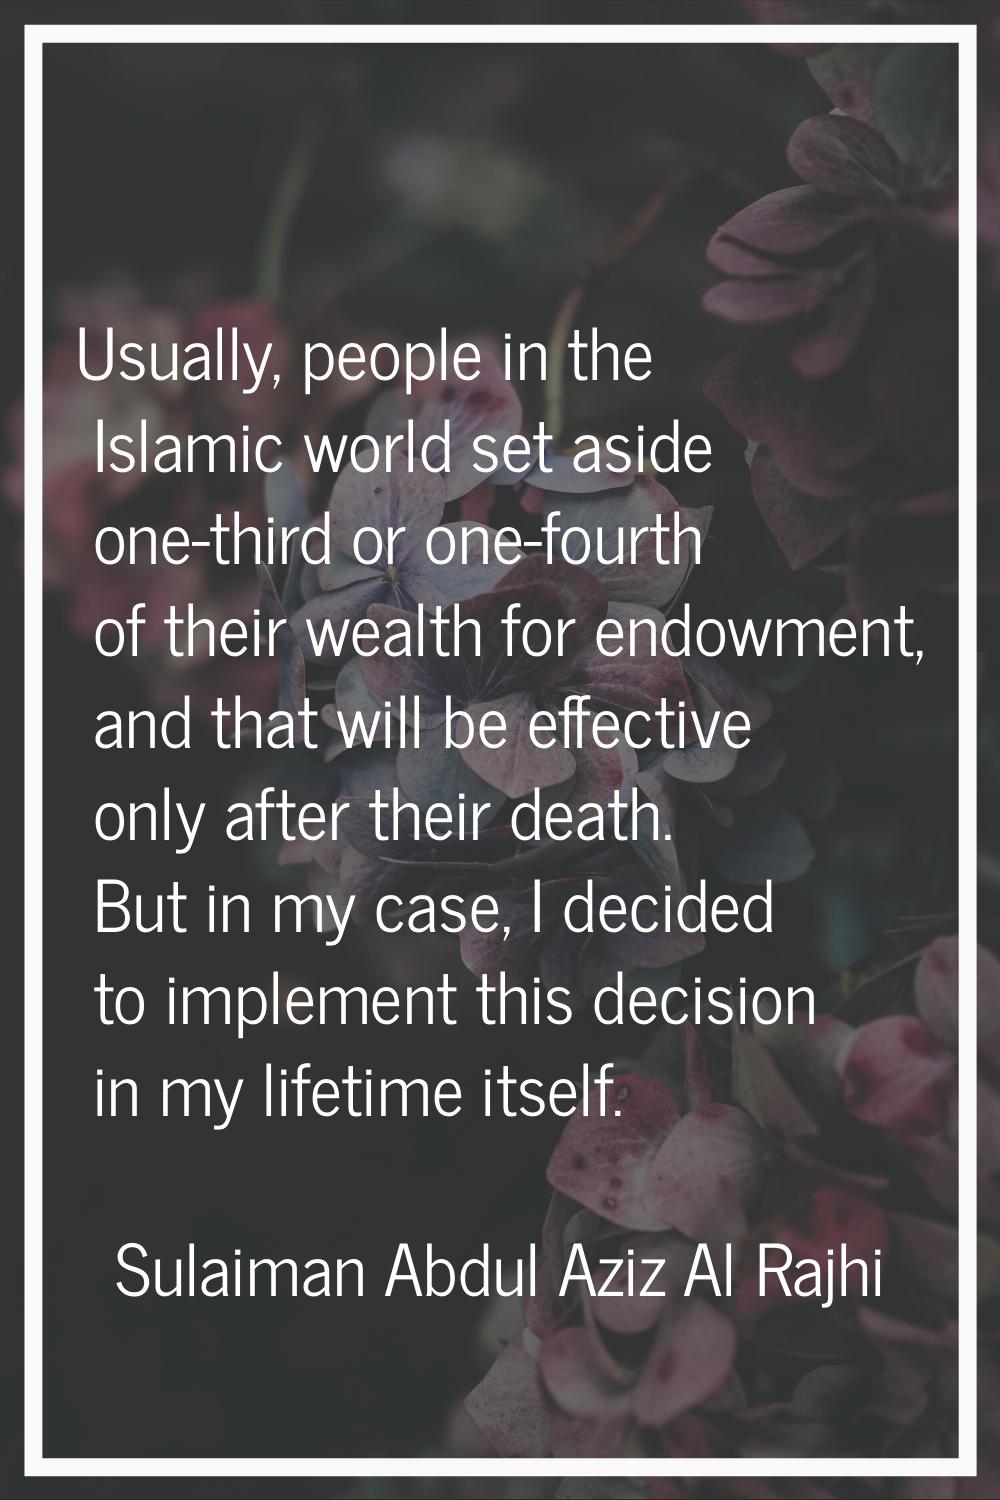 Usually, people in the Islamic world set aside one-third or one-fourth of their wealth for endowmen